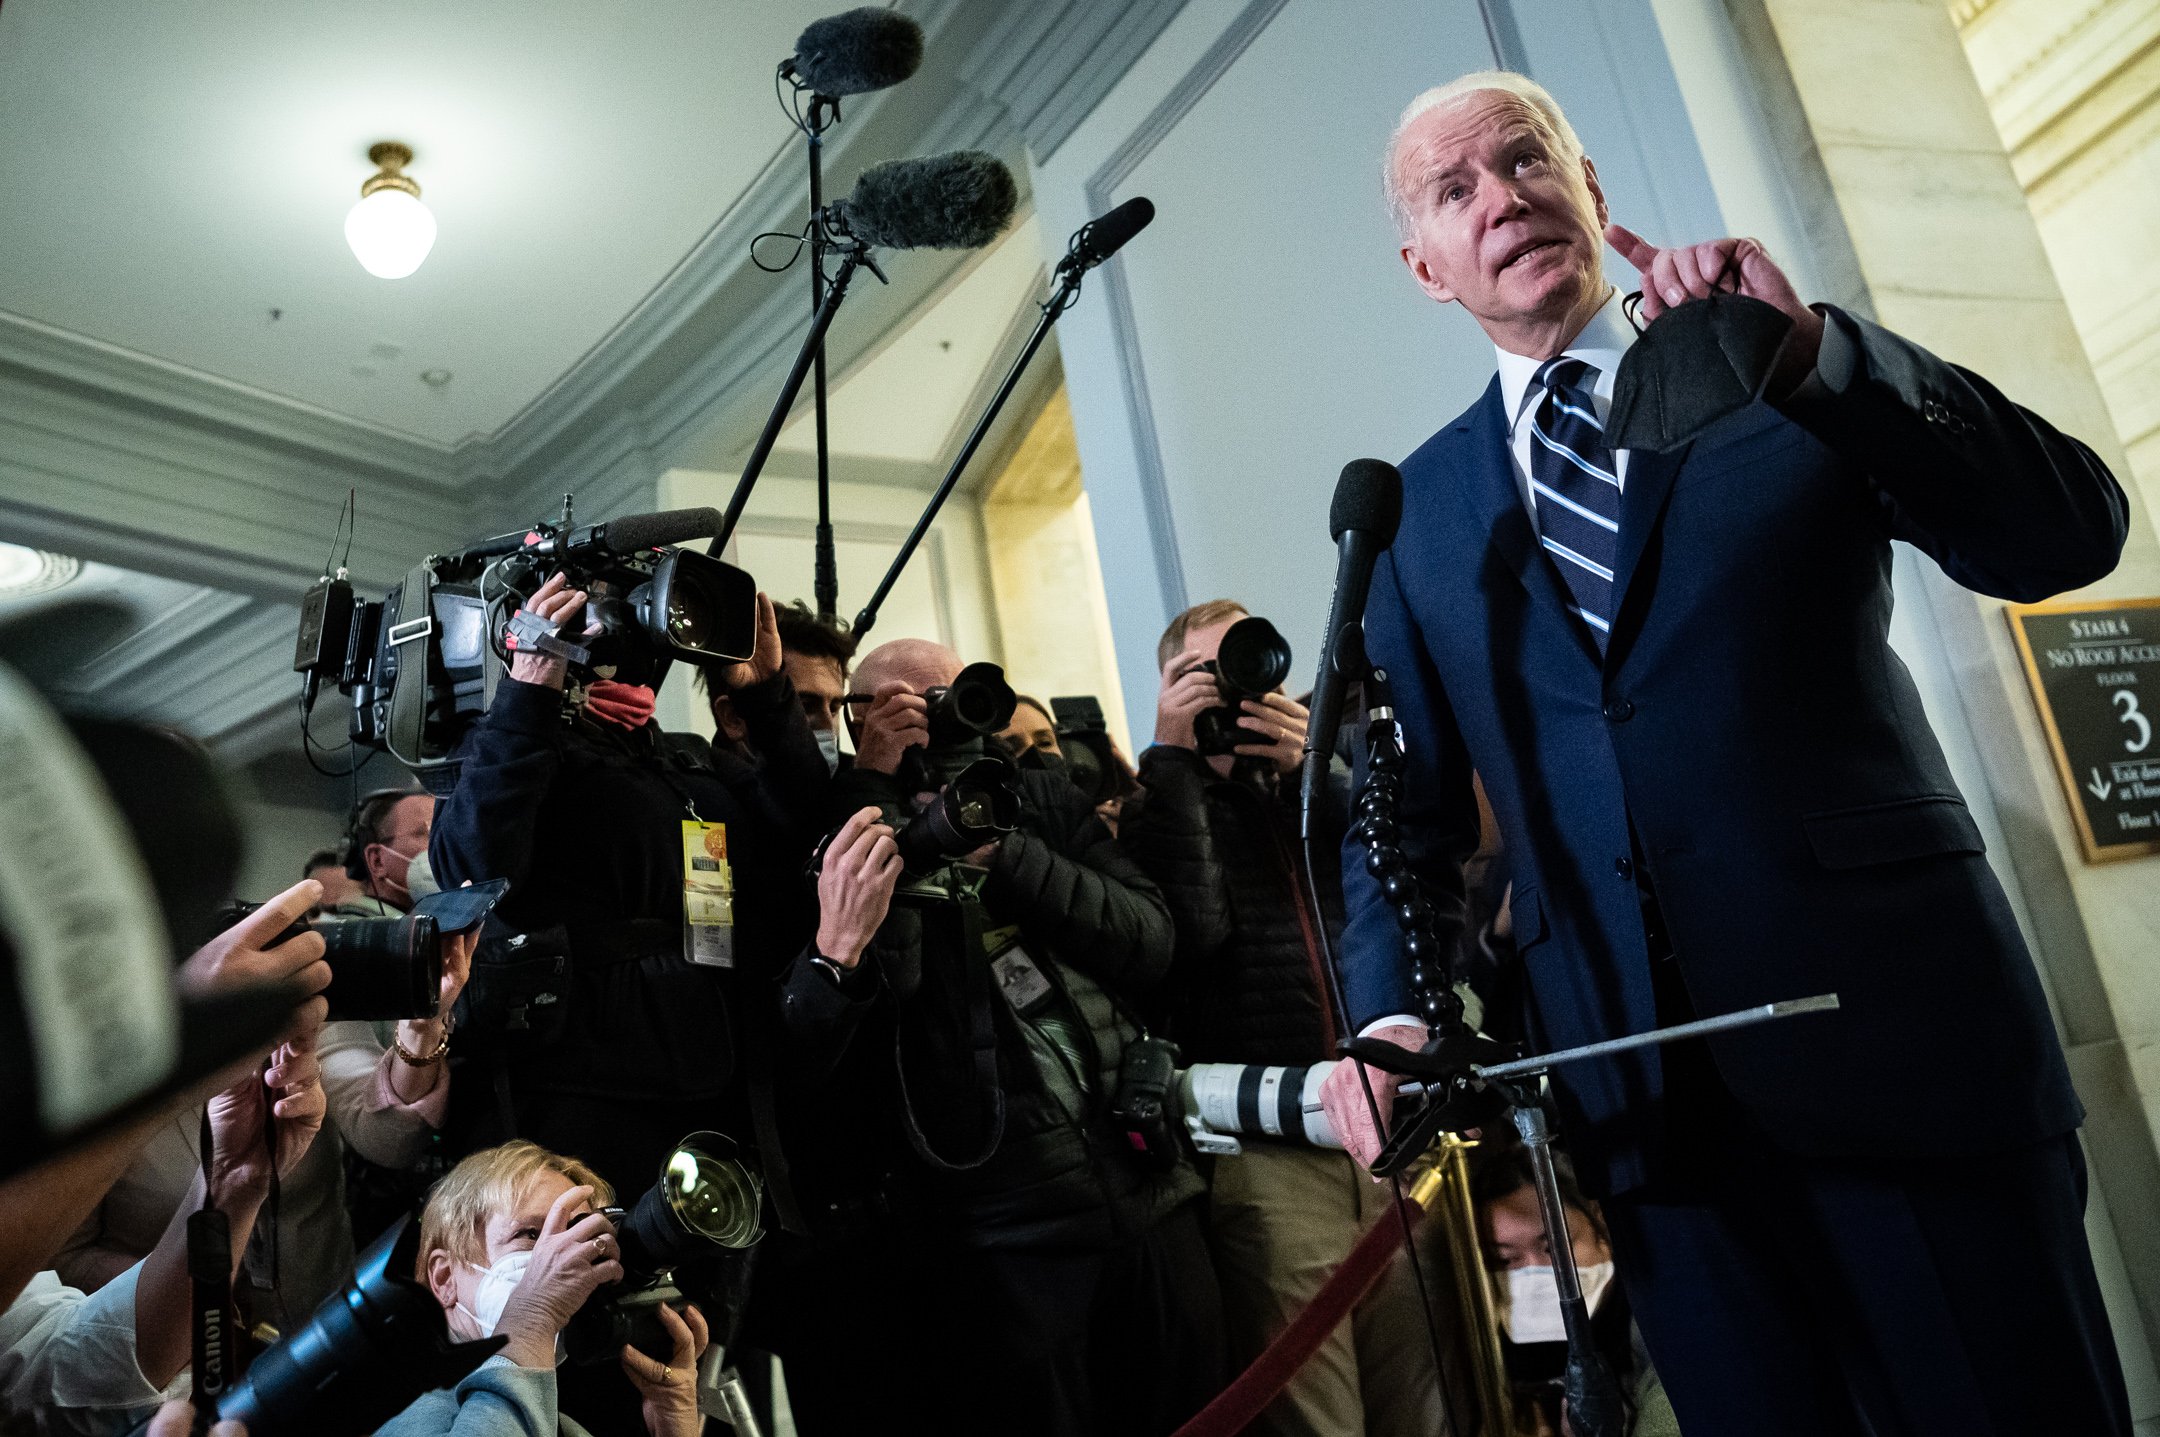  President Joe Biden speaks to media after leaving a luncheon with Senate Democrats where they discussed voting rights and filibuster reform, at the U.S. Capitol, in Washington, D.C., on January 13, 2022. (Graeme Sloan for Sipa USA) 